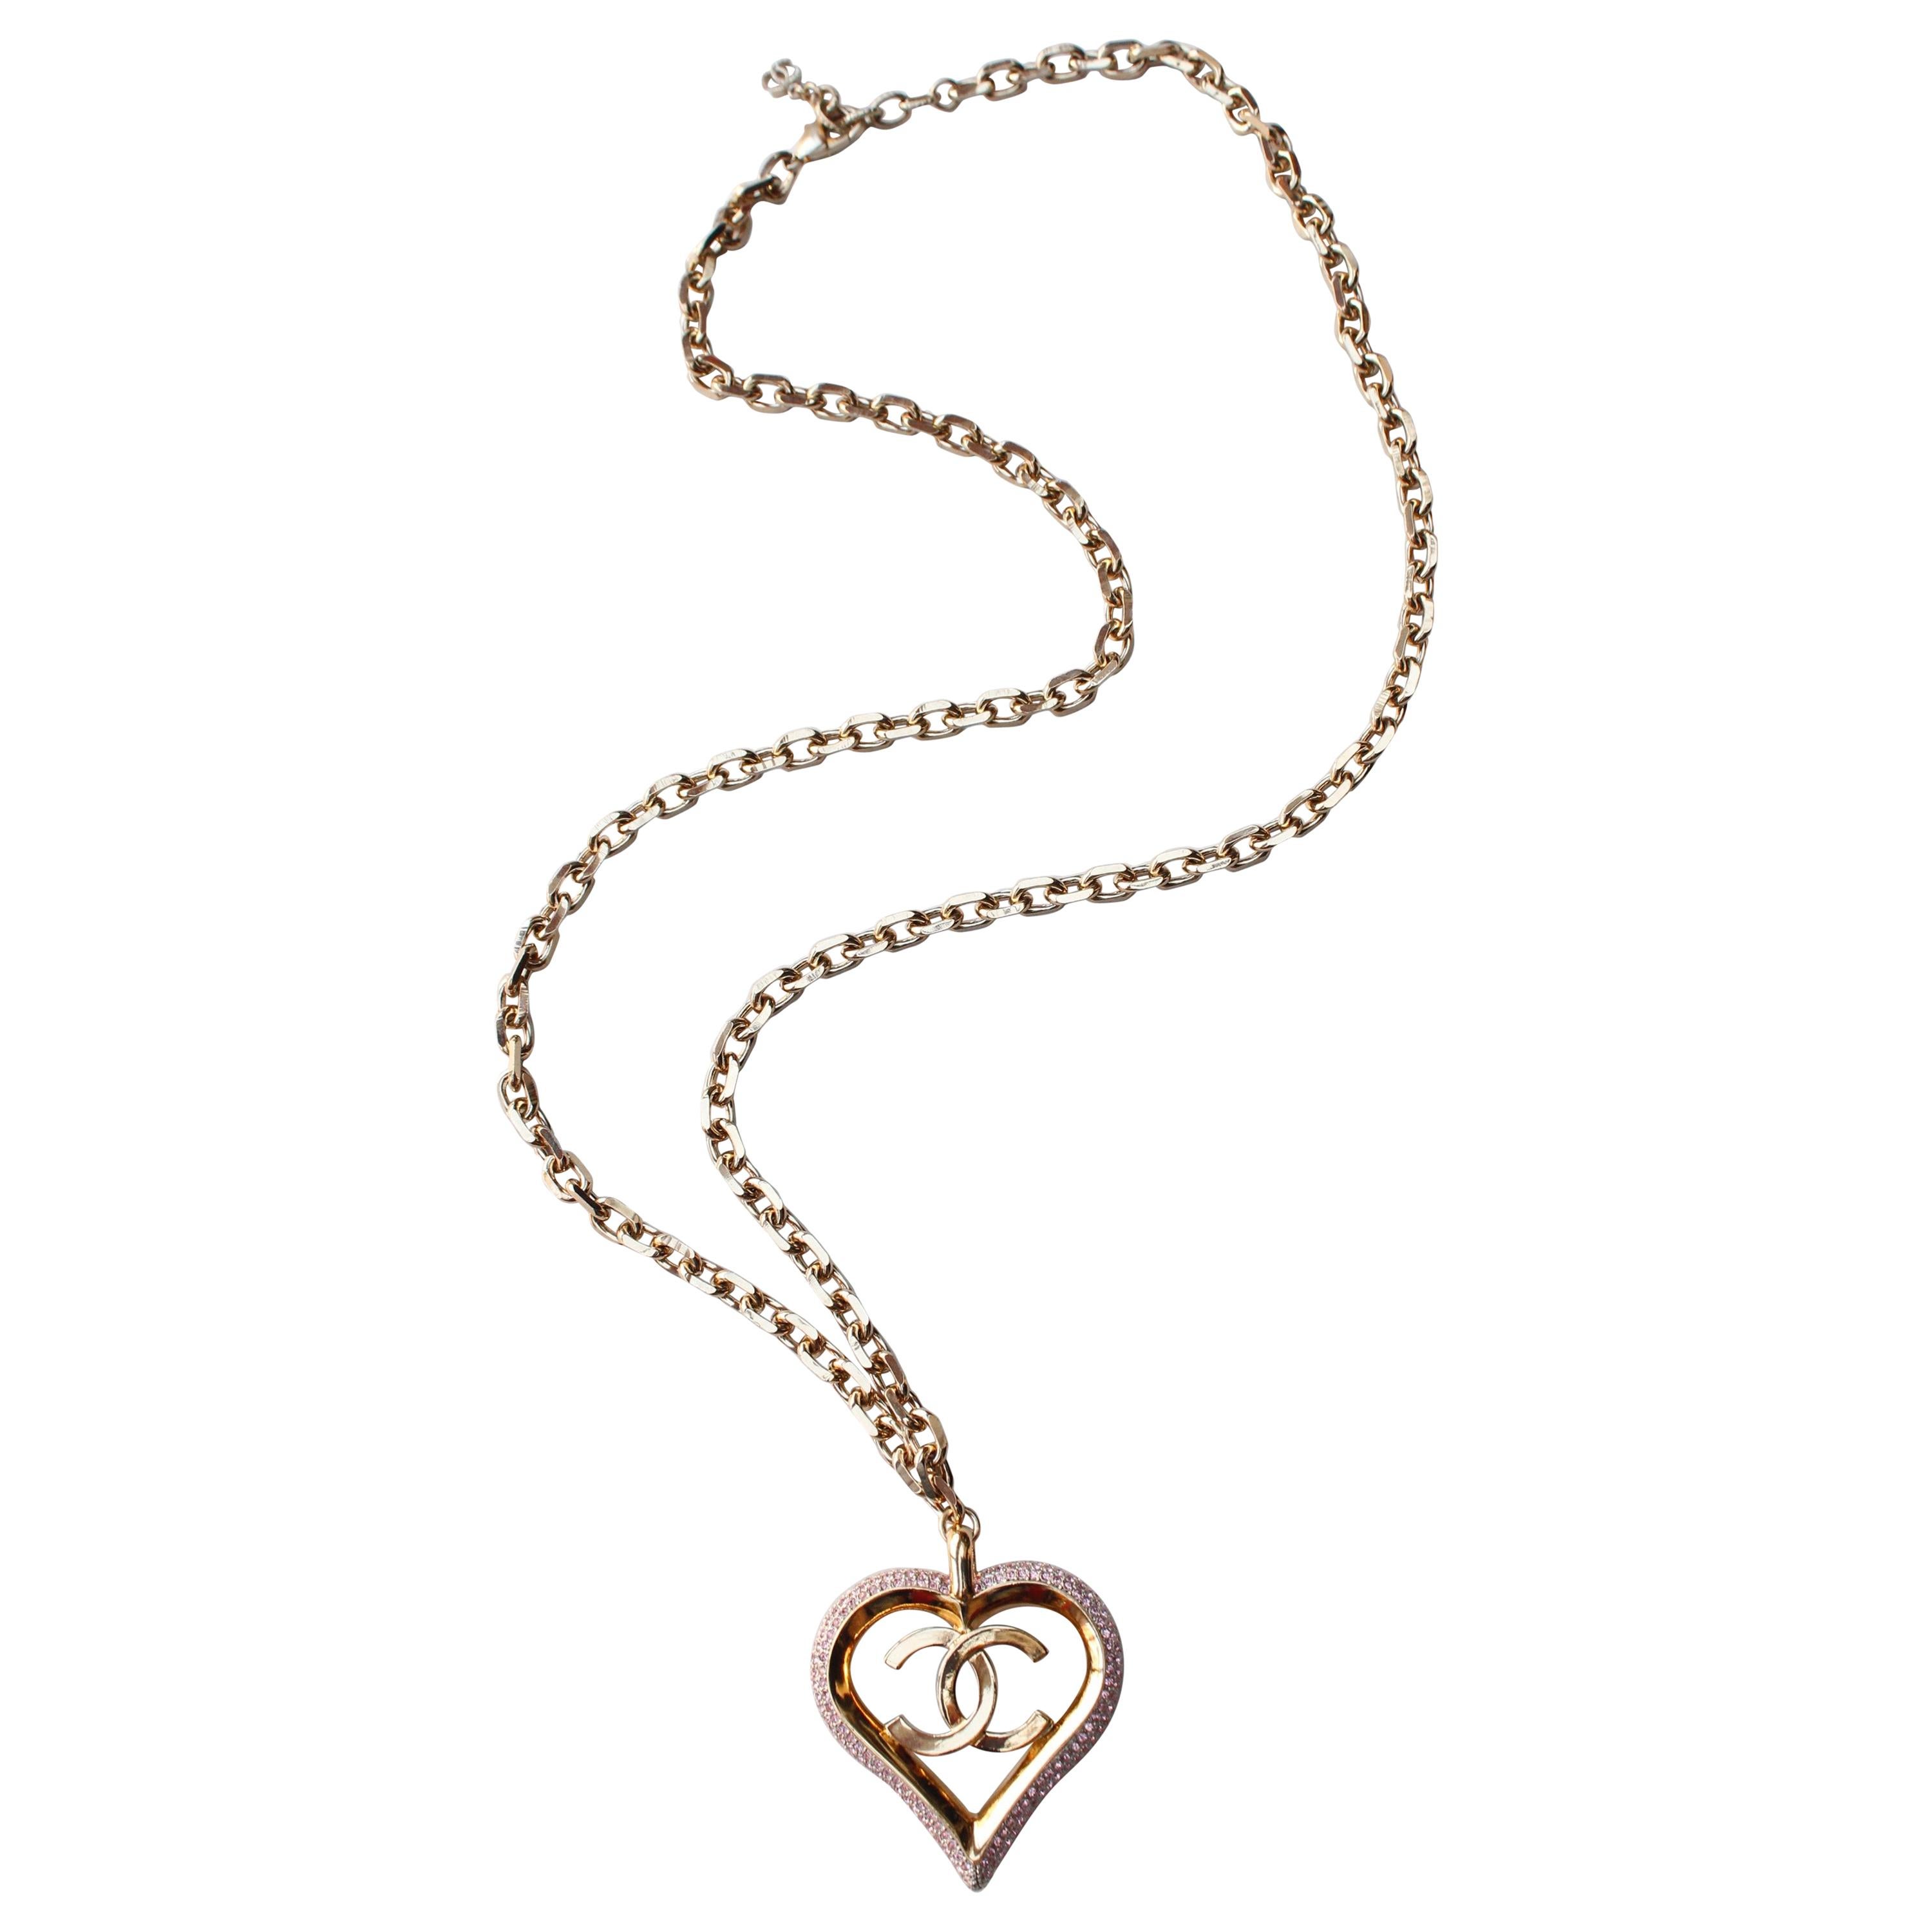 CHANEL 2013 Chain necklace with pink heart pendant and CC logo